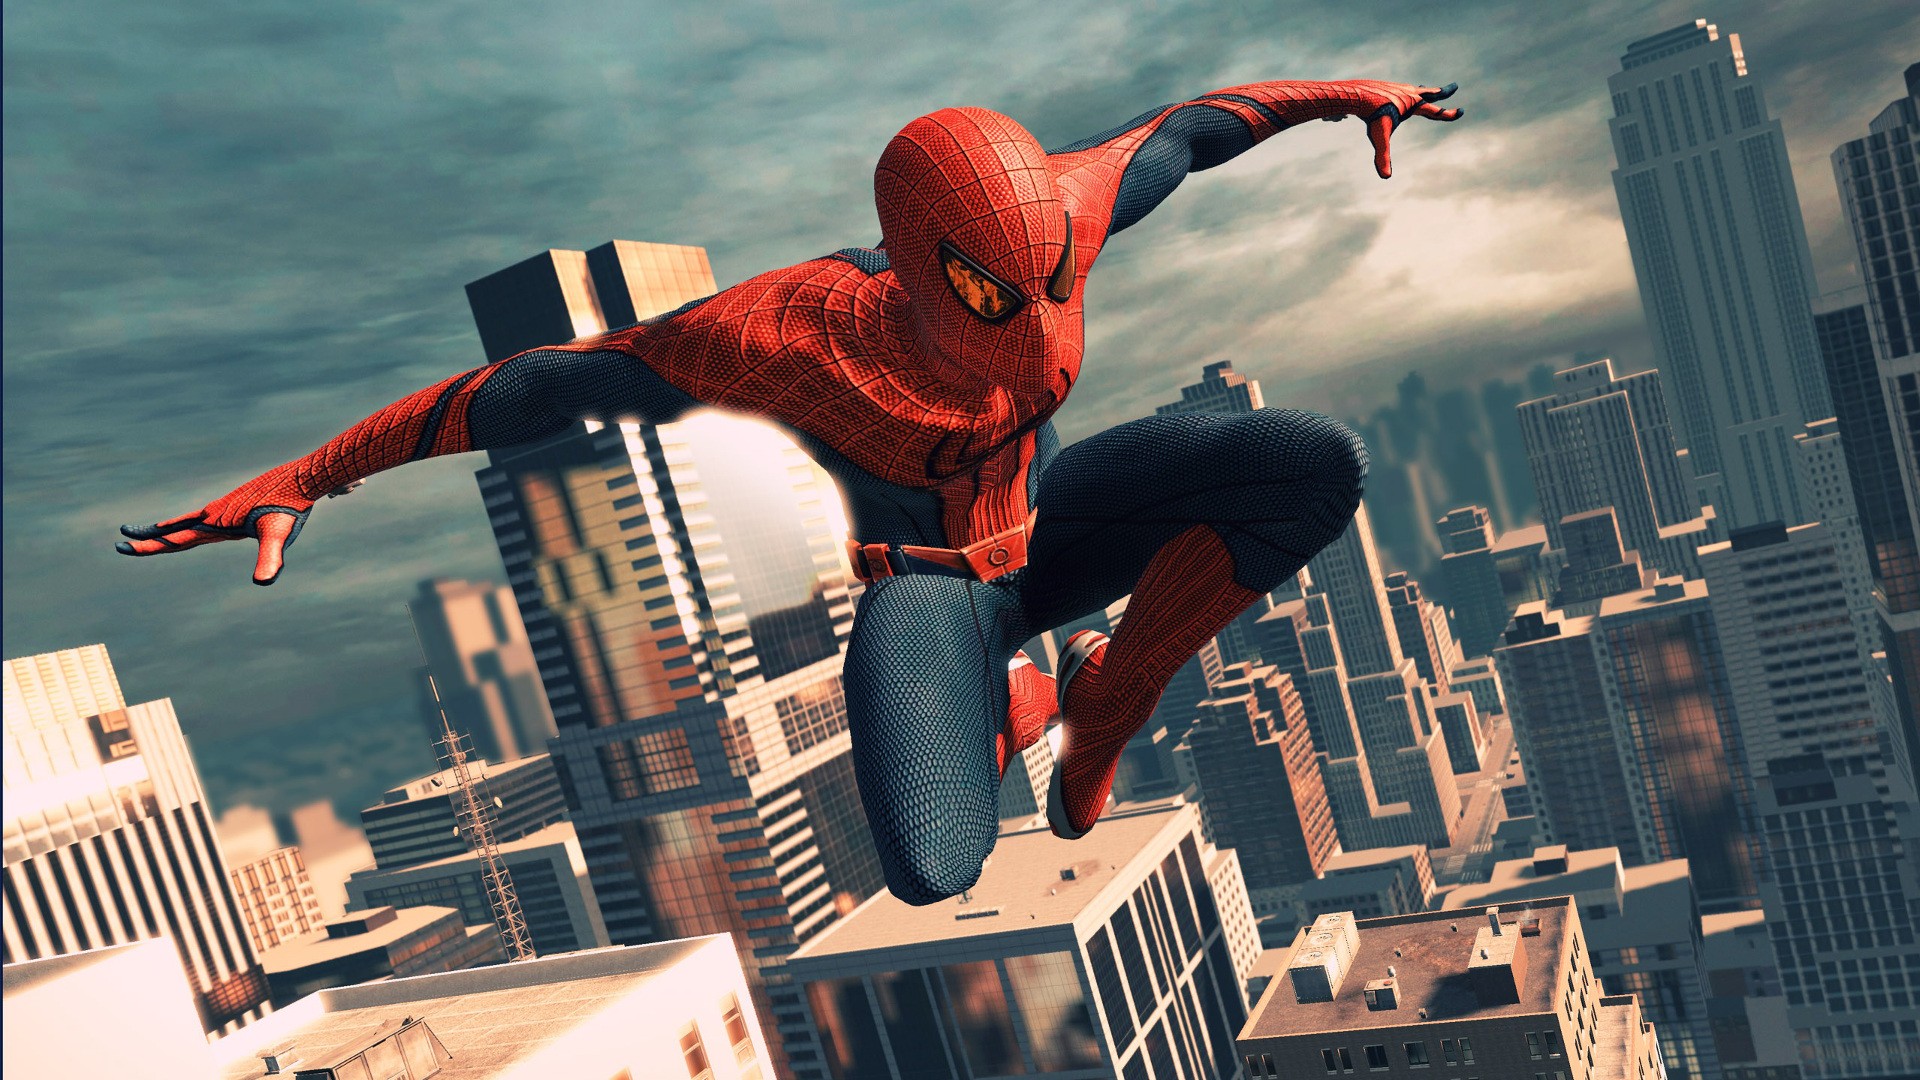 Spiderman wallpaper HD ·① Download free HD wallpapers for desktop and